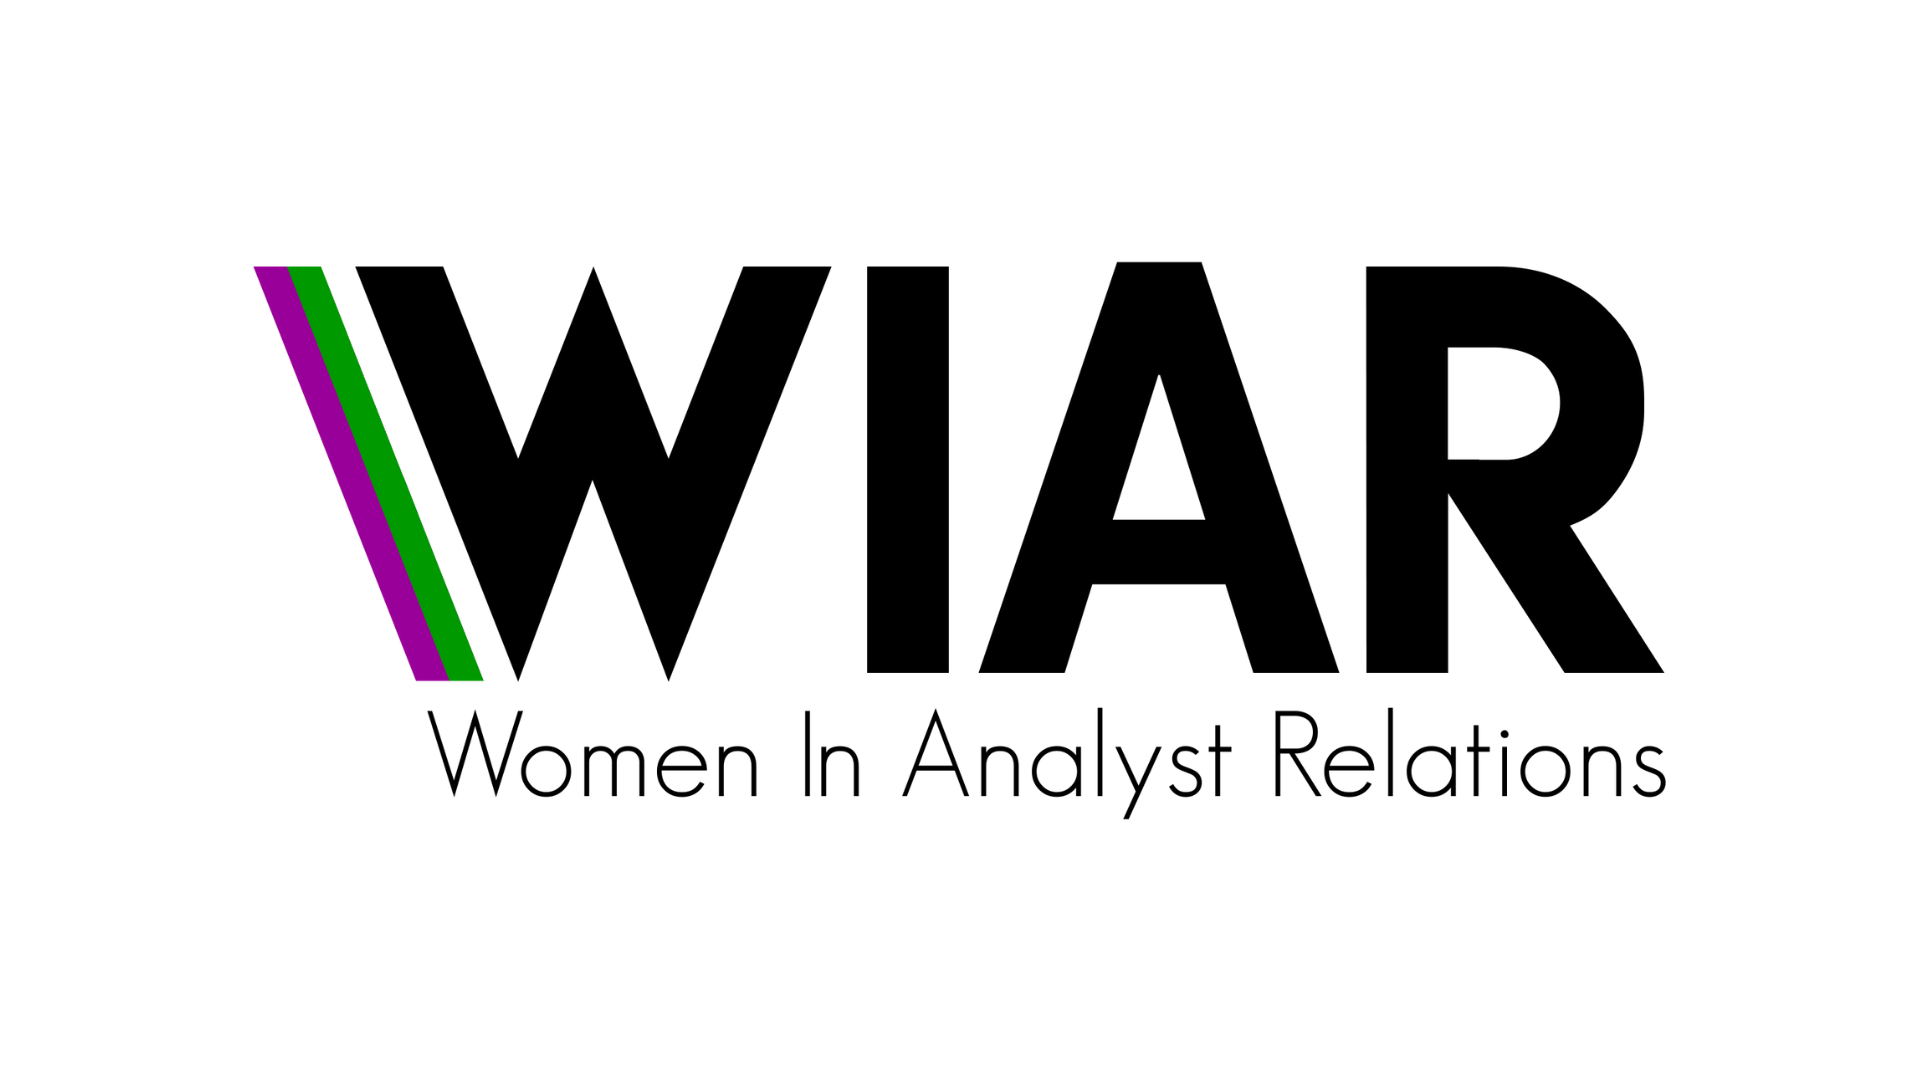 Women in Analyst Relations: interview with Kristin Taylor